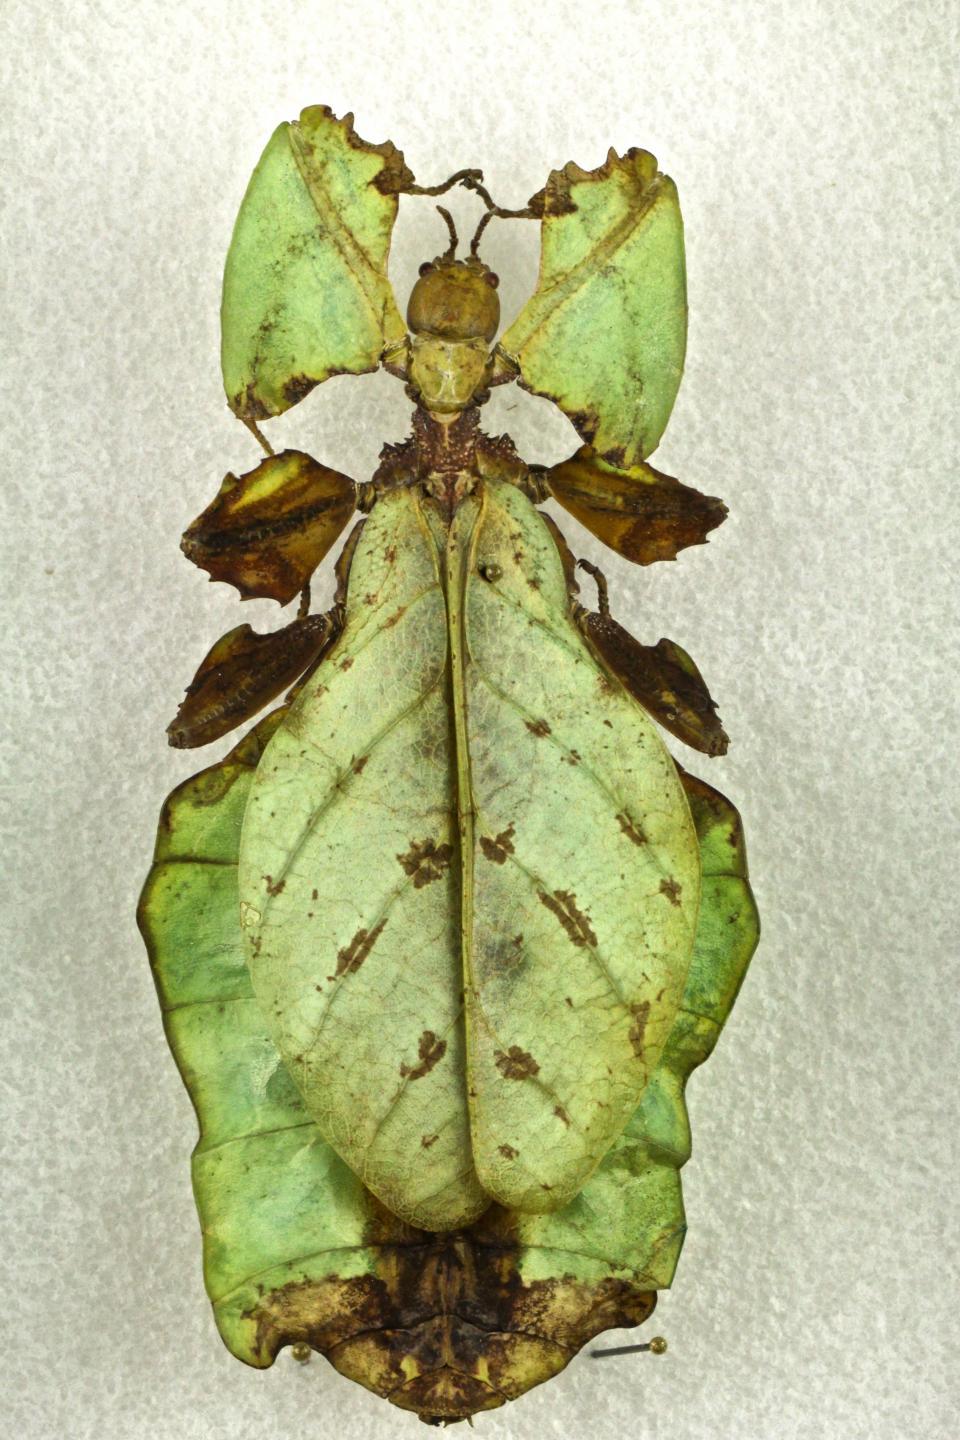 Leaf insect (Phylliidae sp.).